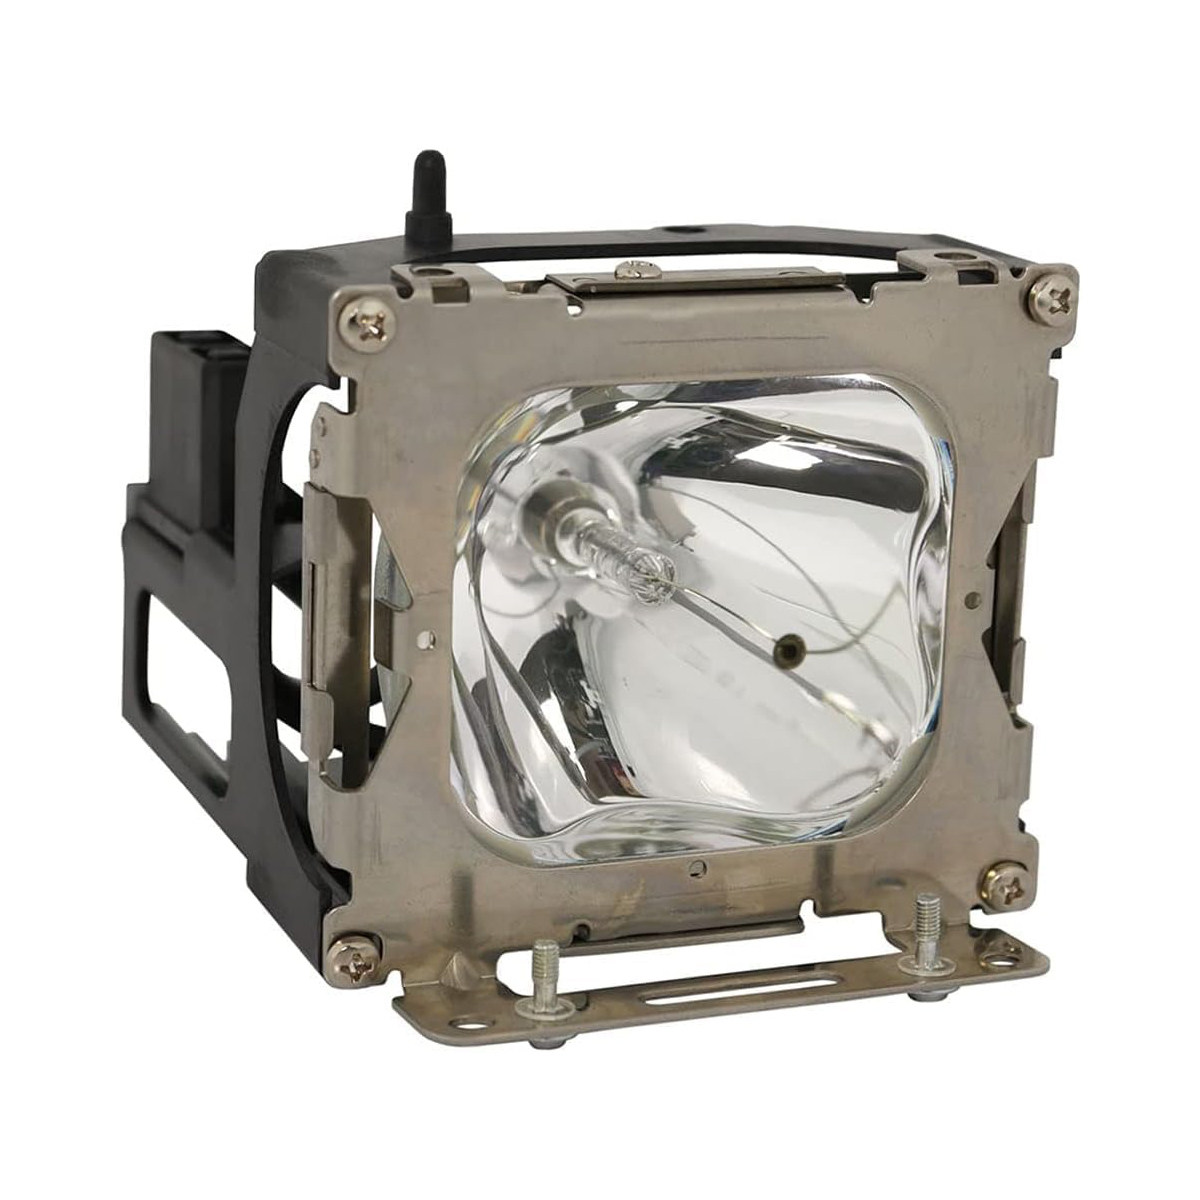 Replacement Projector lamp RLU-150-03A  For VIEWSONIC PJ1035-2 PJL855